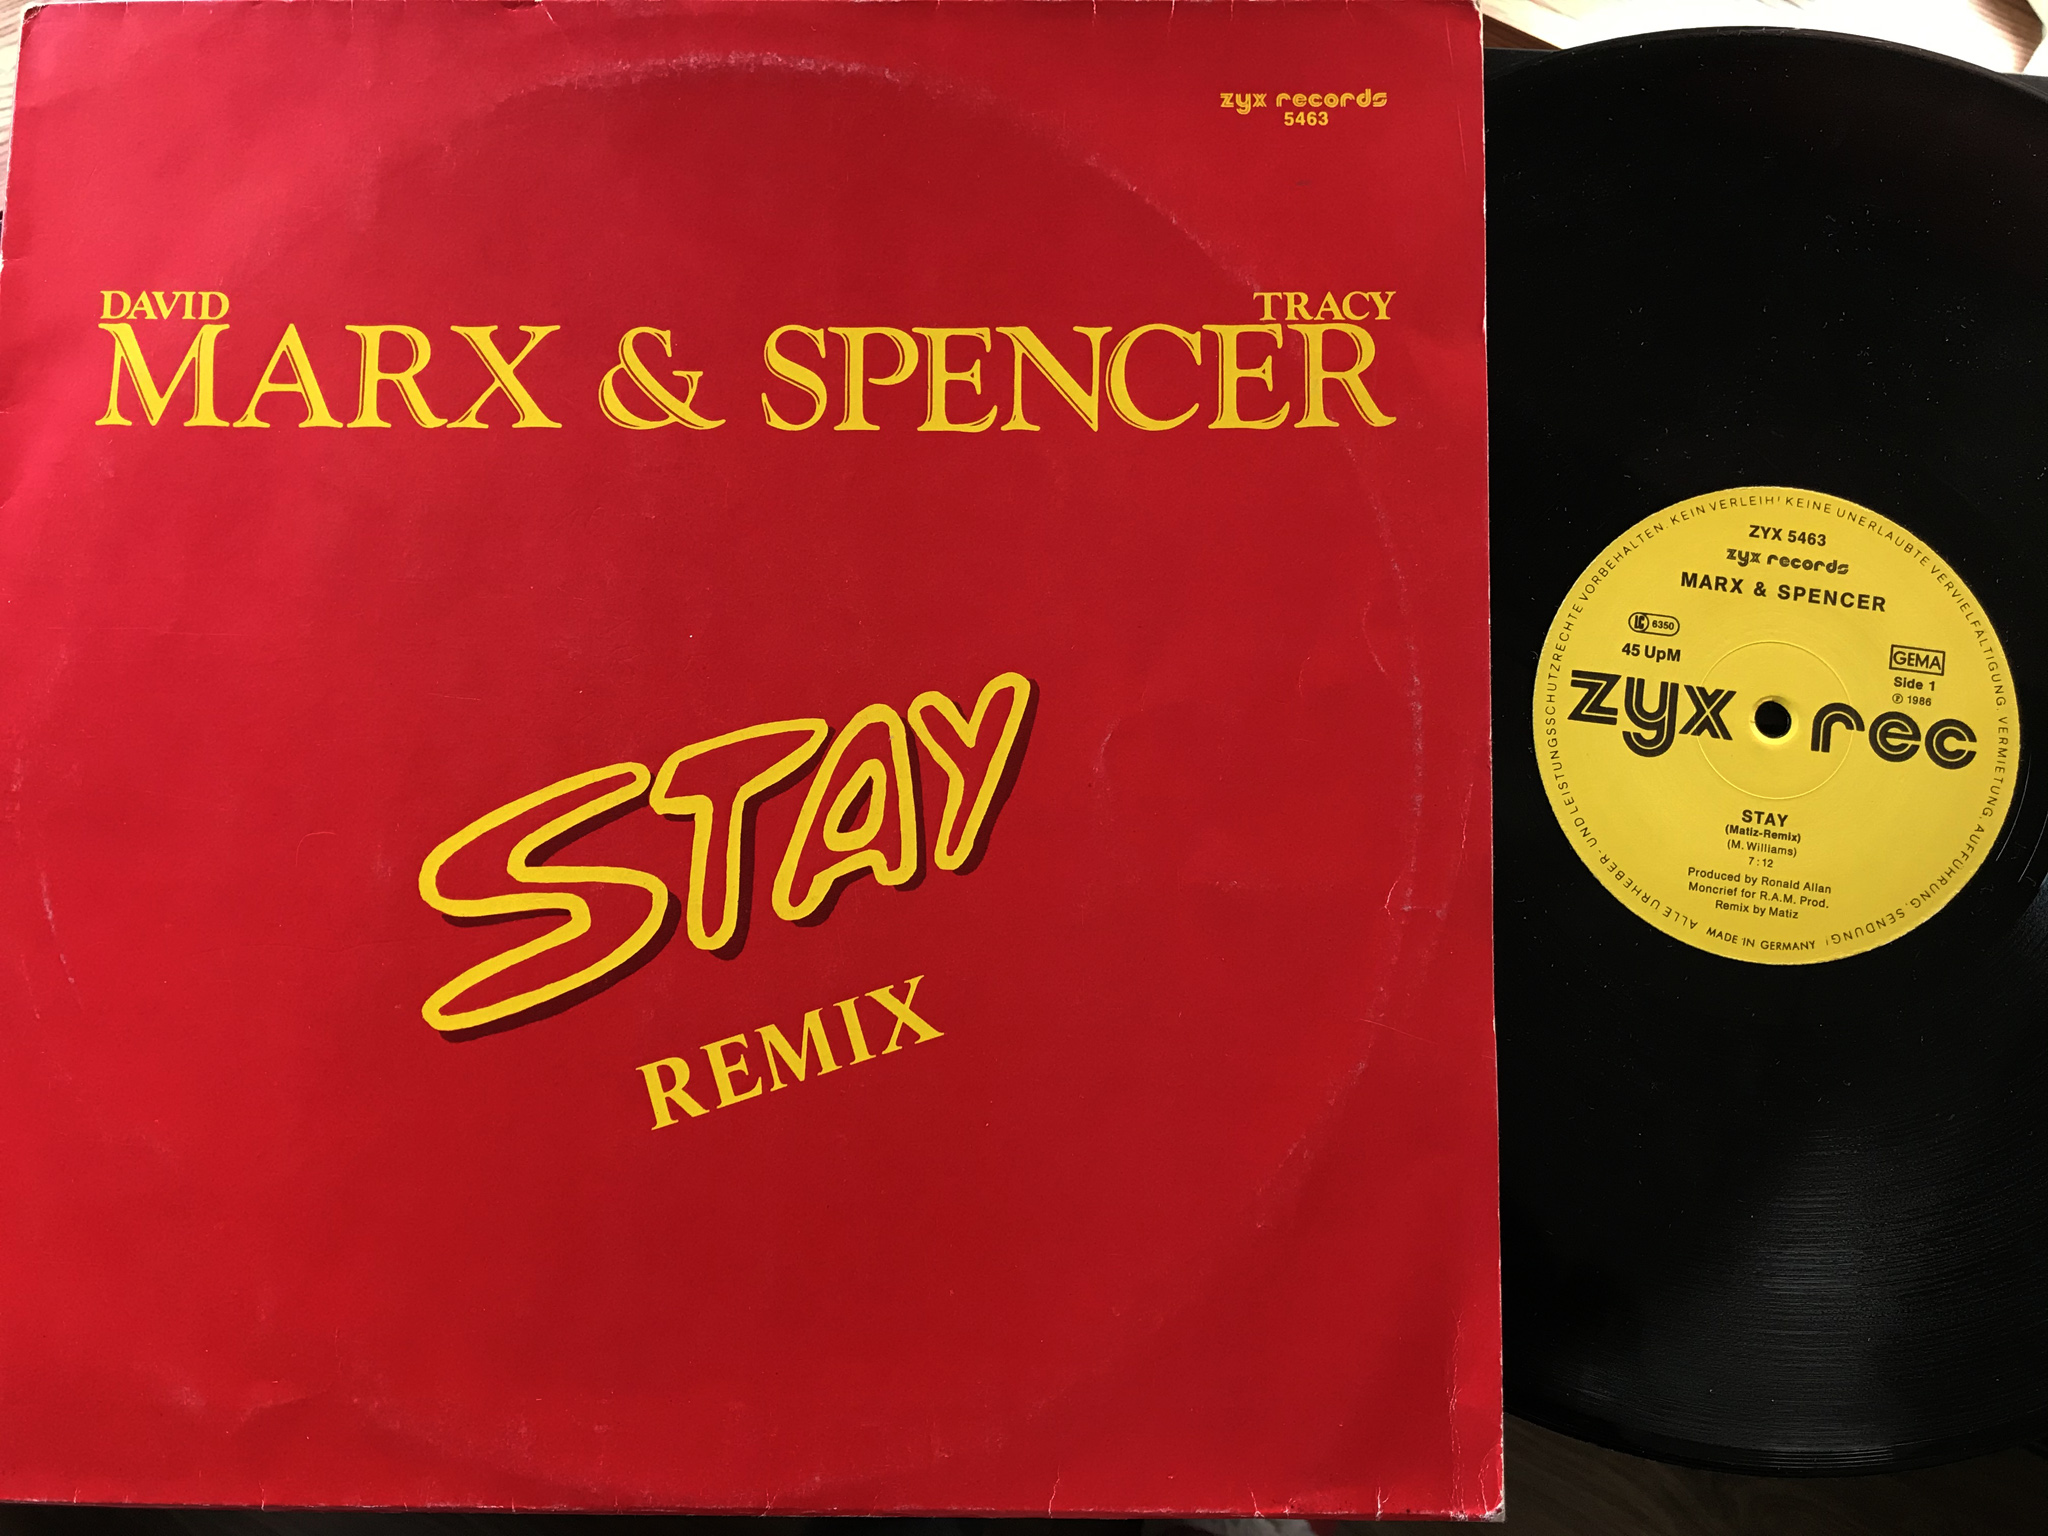 Marx and Spencer - Stay (Remix)